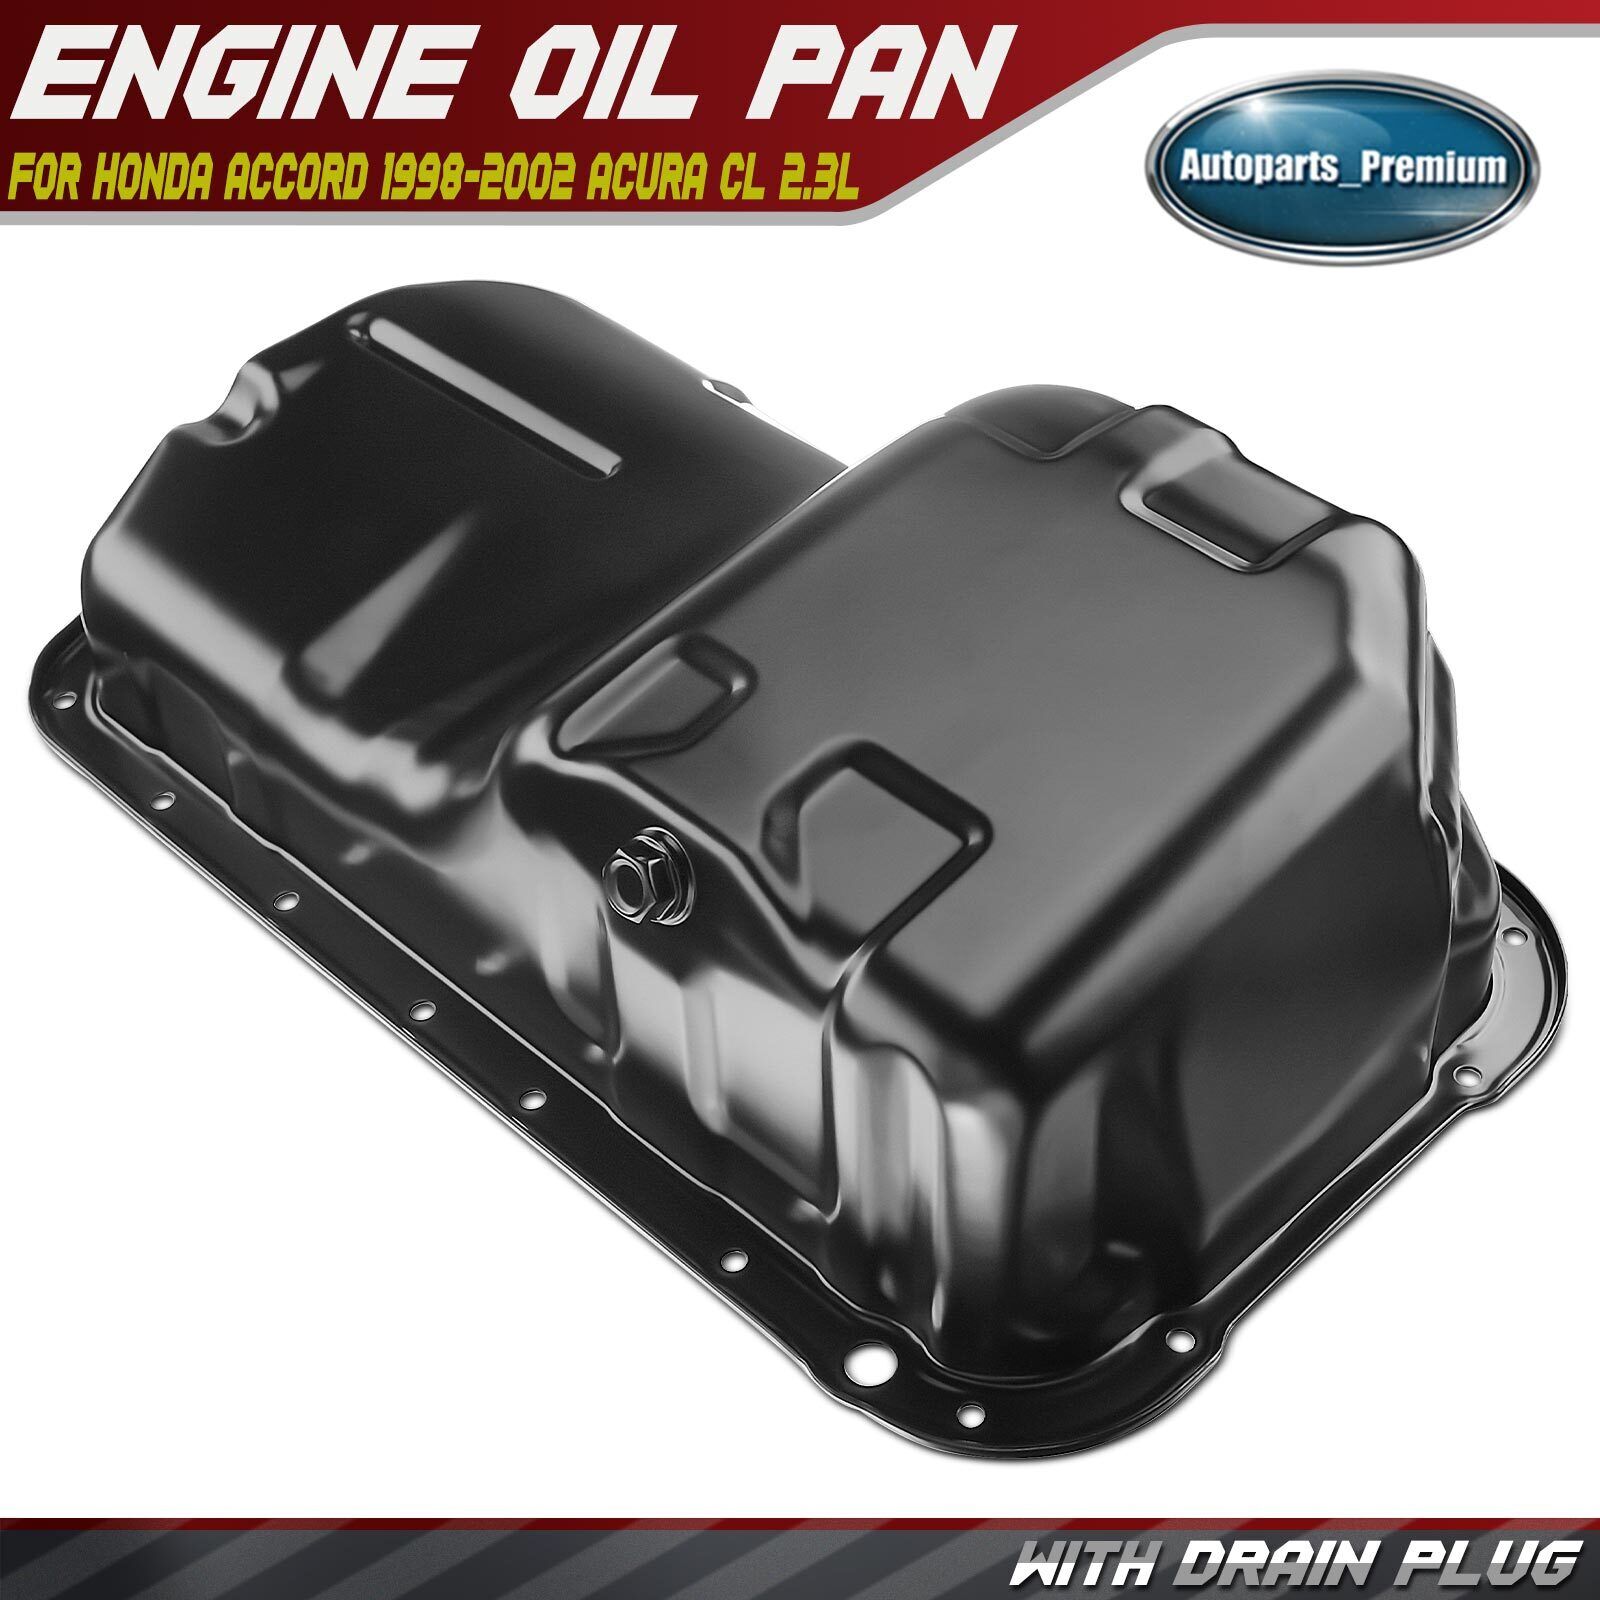 Engine Oil Pan for Honda Accord 1998-2002 Odyssey 1998 Acura CL 1998-1999 2.3L